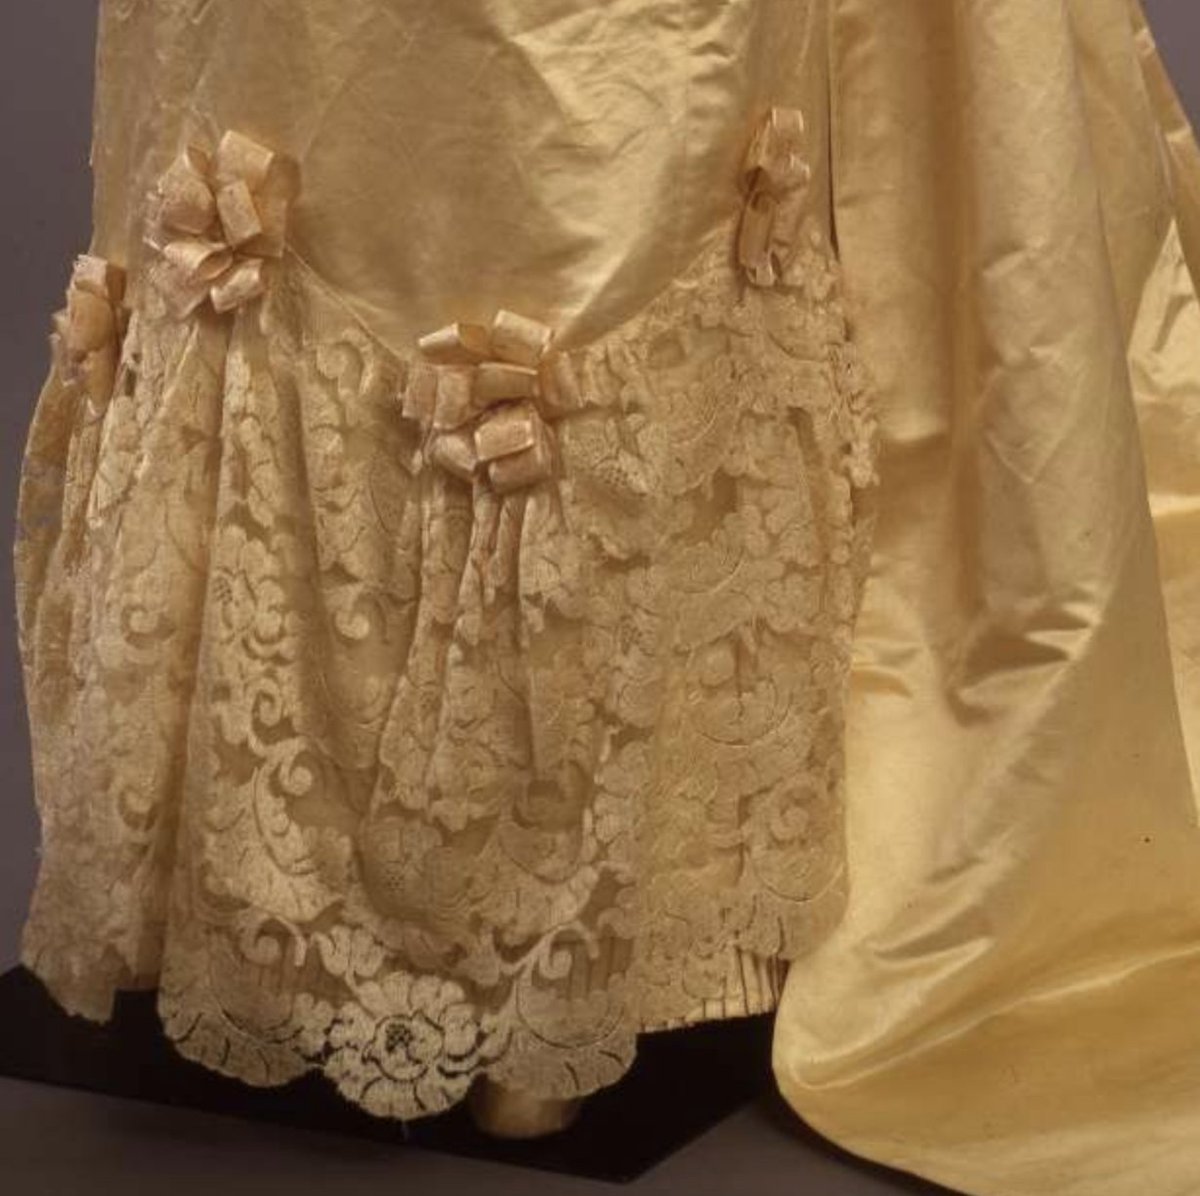 Today's #ootd is this 1890-5 ivory silk satin wedding dress with blonde lace trimmings and rosettes. The dress is what the object description called 'overcolored,' suggesting that the color got darker with age. Still stunning! #Gildedglamour #PittiPalace #Fashionhistory